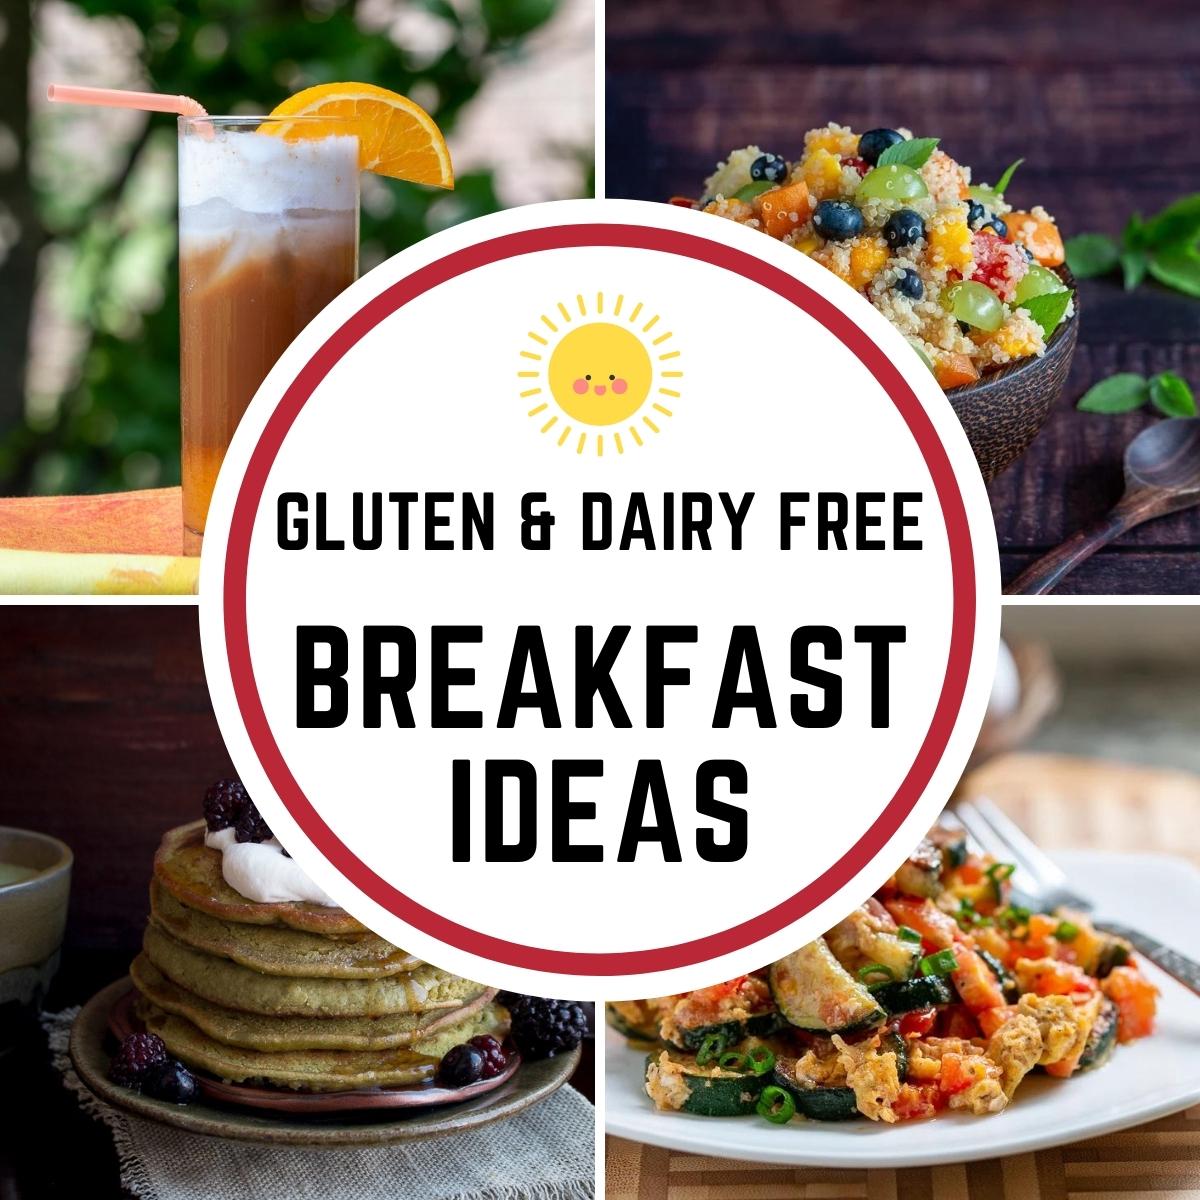 Four delicious gluten and dairy free breakfast ideas shown together.